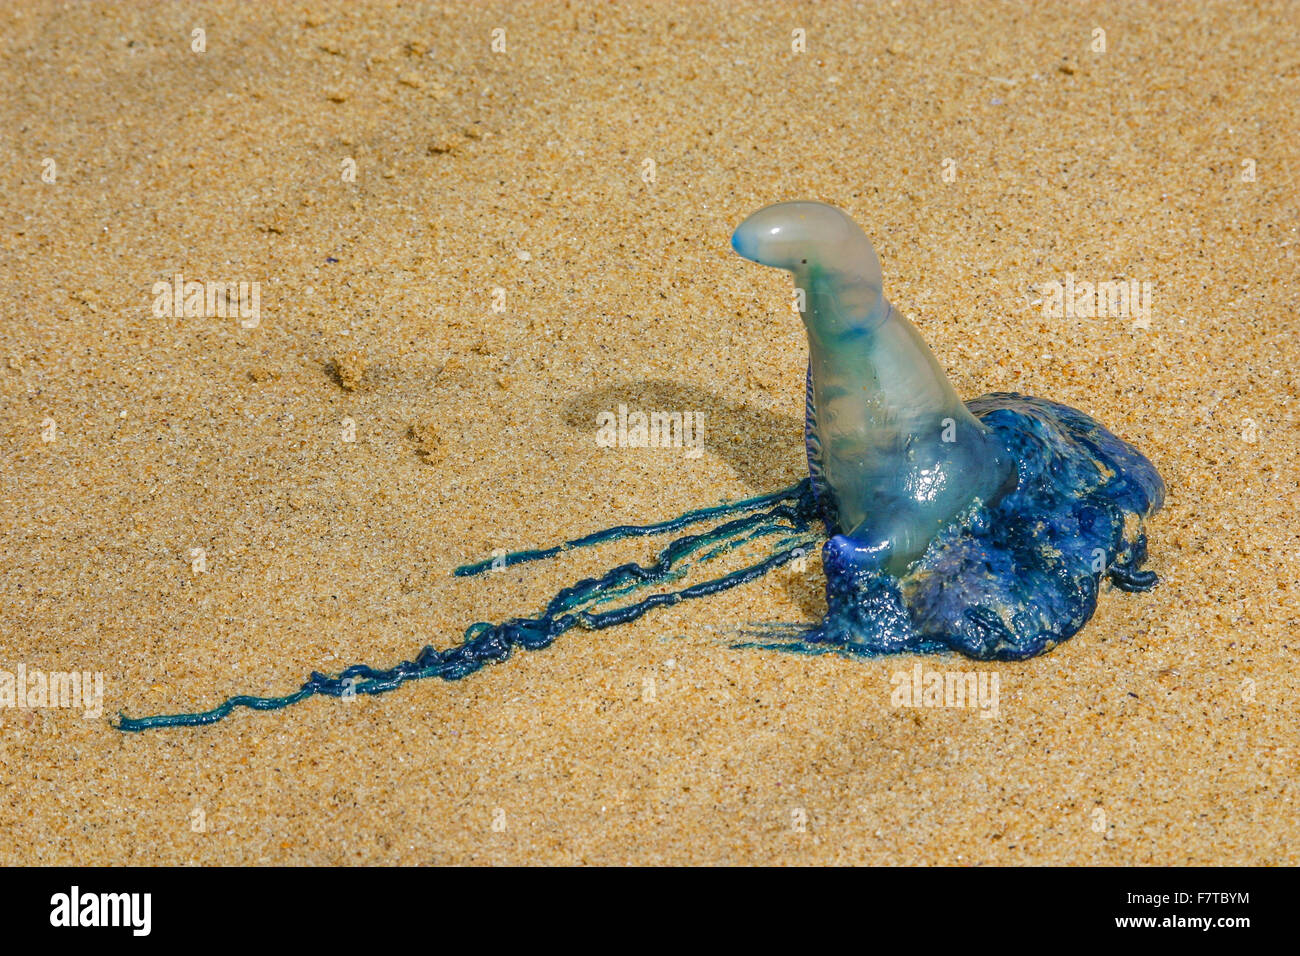 Australia, New South Wales, Central Coast, Bouddi National Park, a blue bottle washed up at the beach of Maitland Bay. Stock Photo